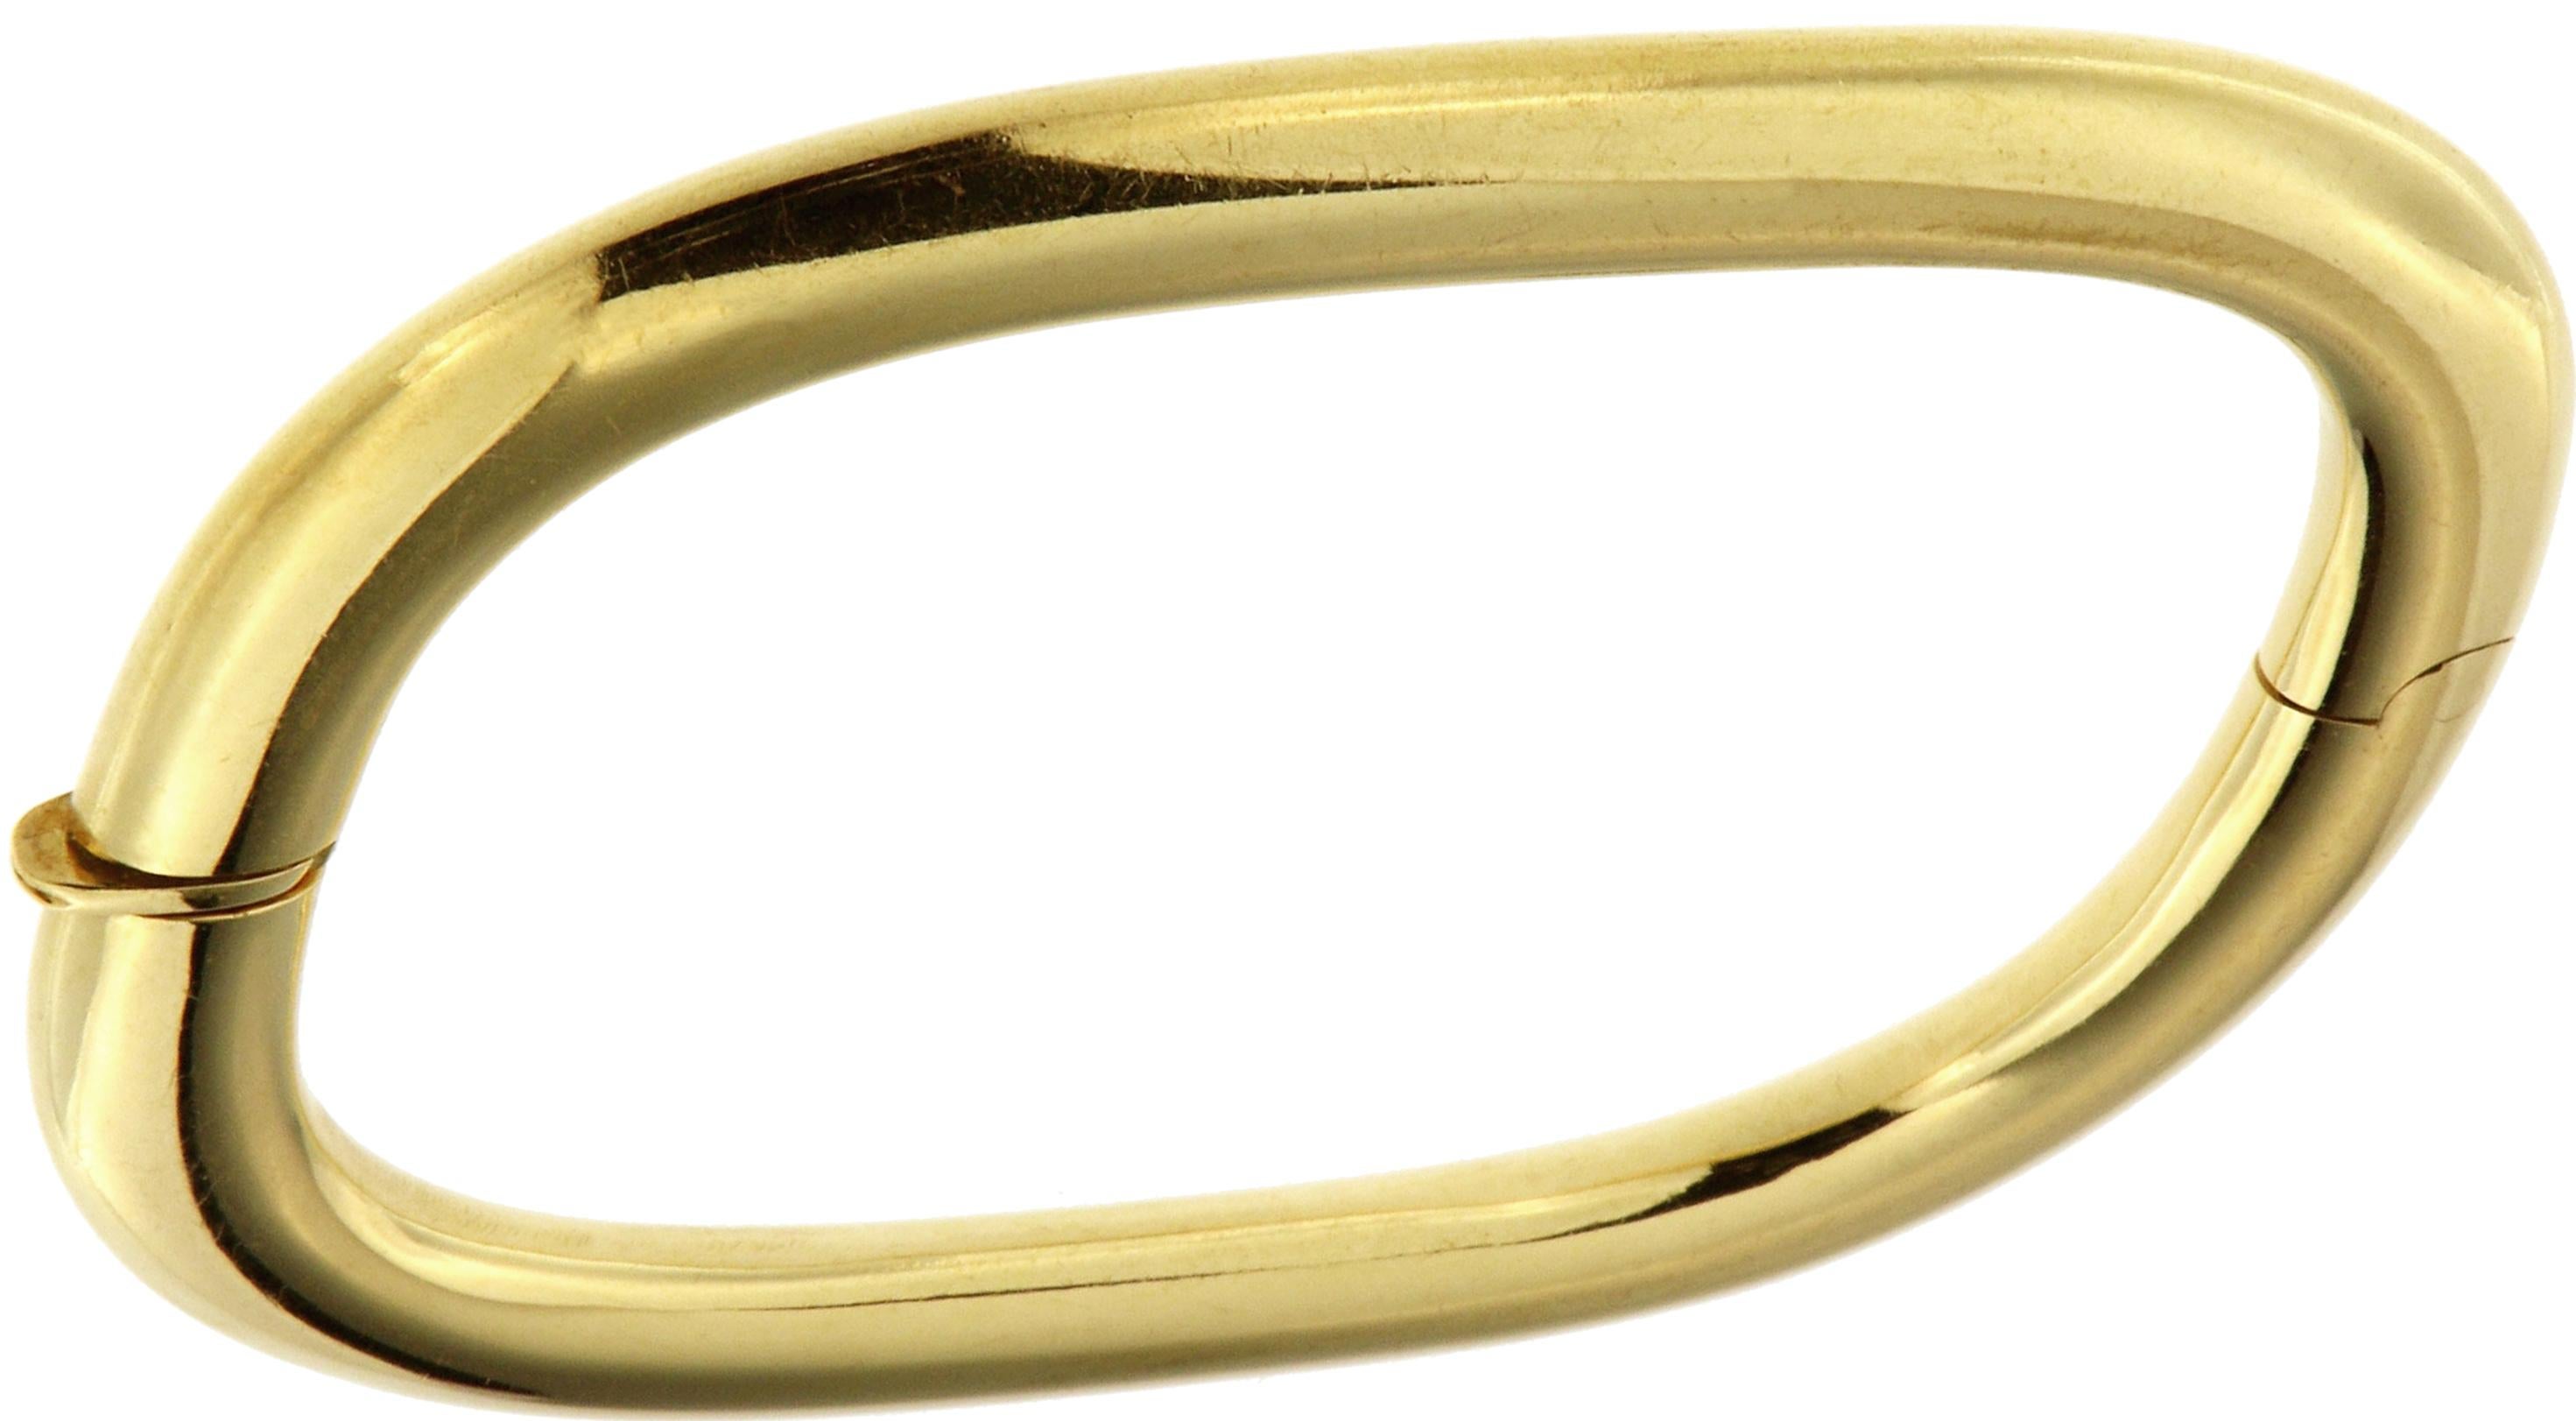 1980s Cuff Bracelet in 18k yellow gold. The width is 4 x 8 mm / 0.157 x 0.314 inches. The inner dimension of the bracelet are 58 x 45 mm / 2.283 x 1.771 inches. Handcrafted in Italy. They are marked with the Italian Gold Mark